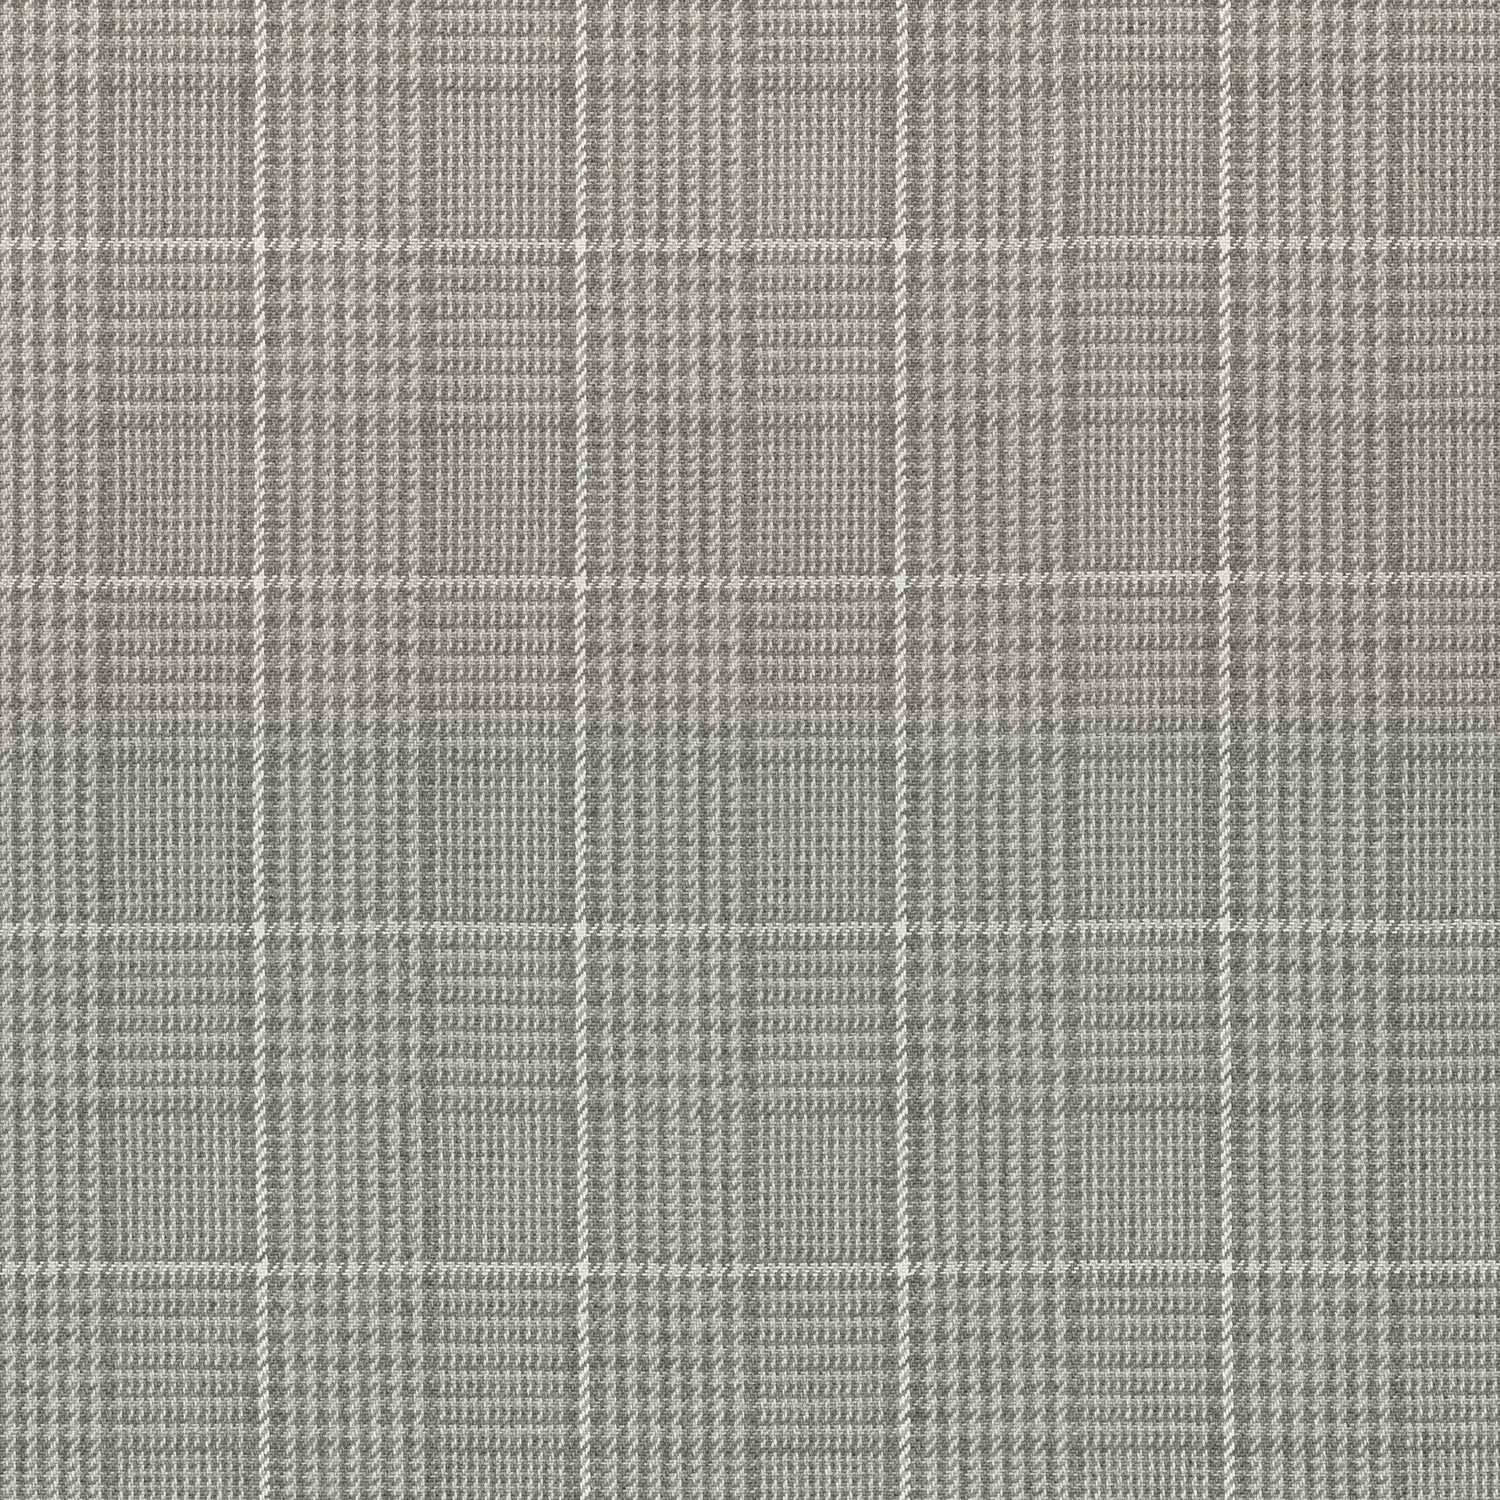 Grassmarket Check fabric in grey color - pattern number W710200 - by Thibaut in the Colony collection